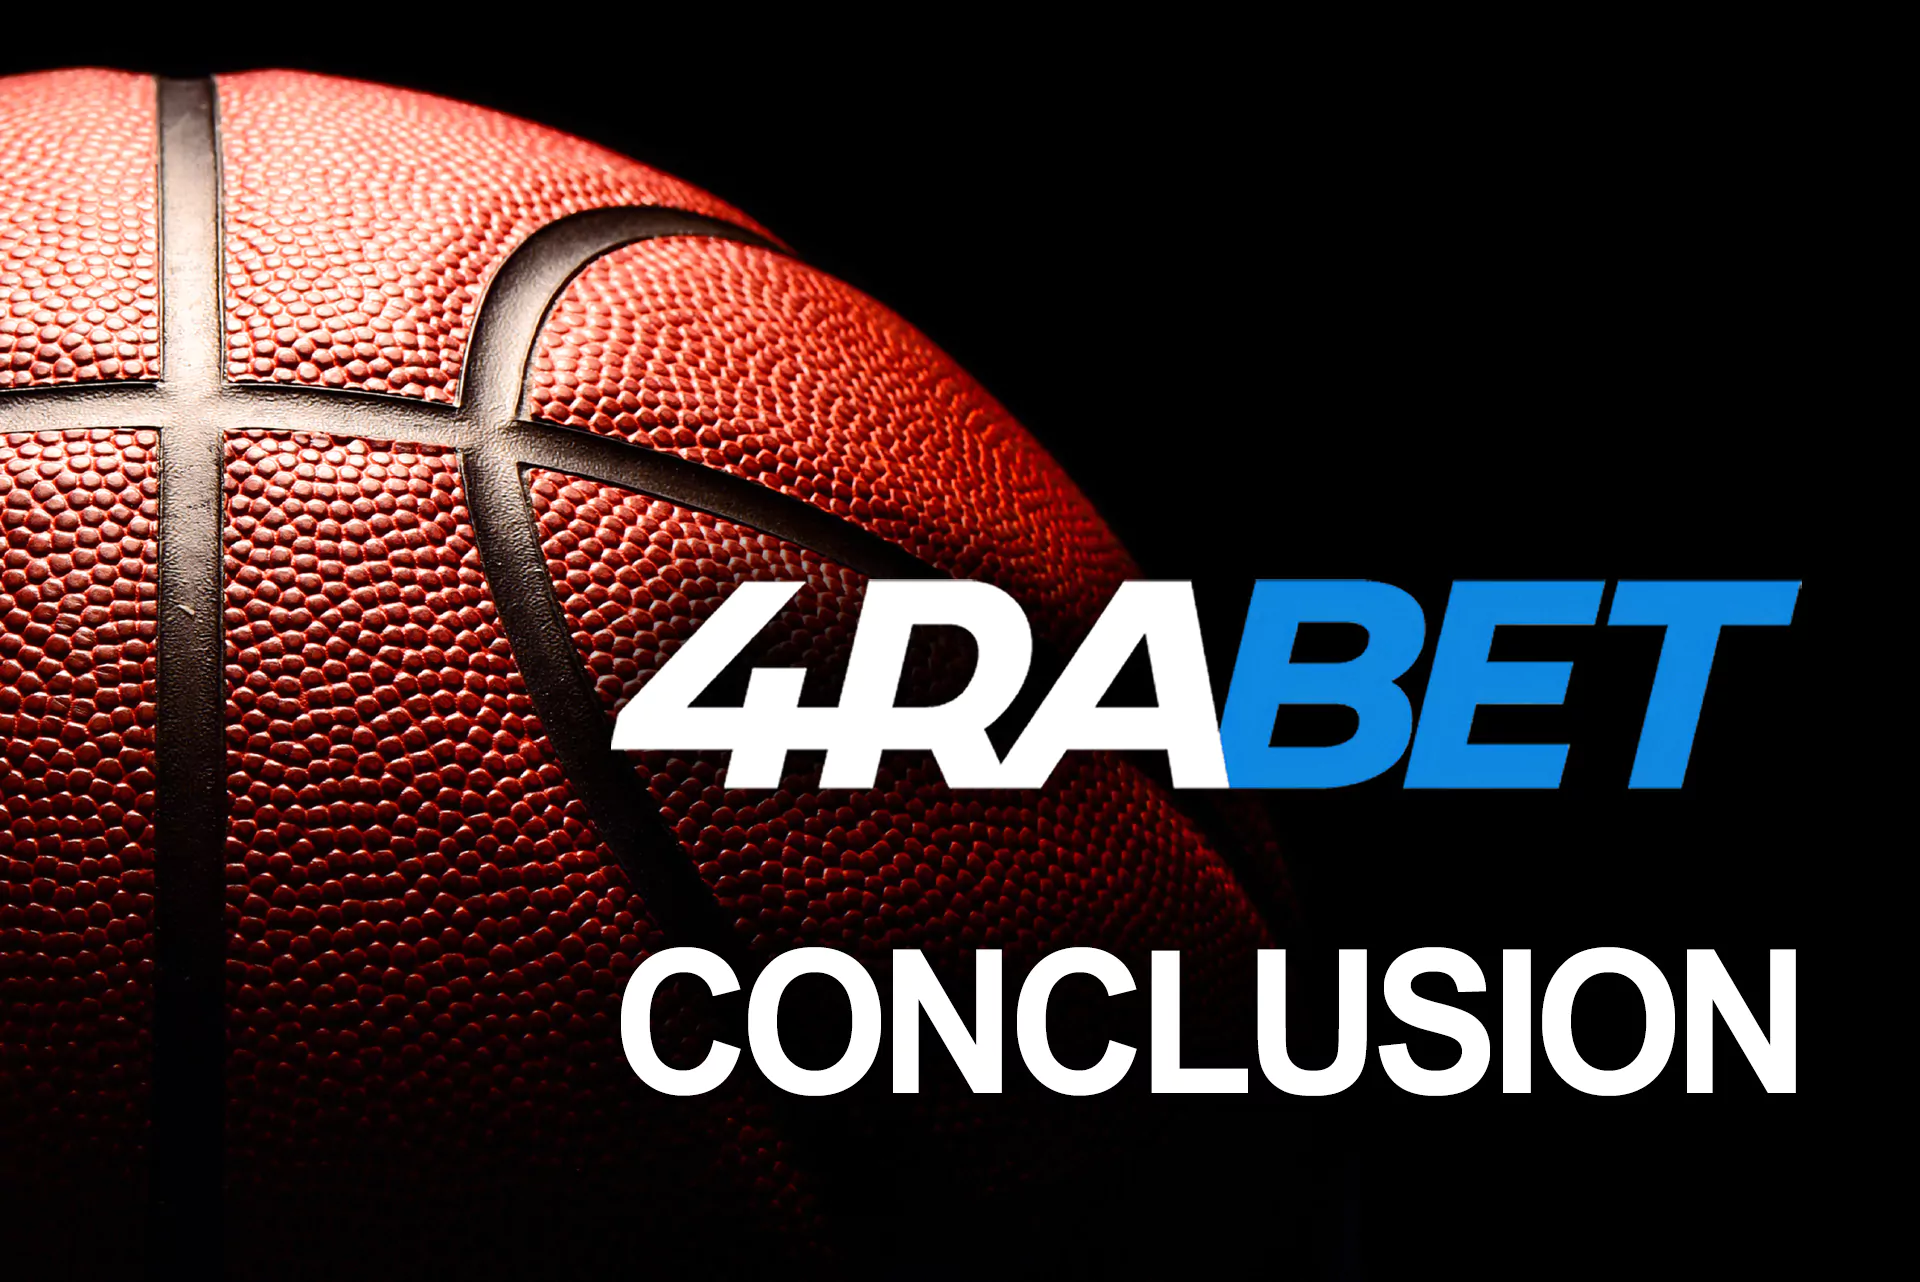 At 4rabet you can easily place bets on the NBA 2K events anytime.